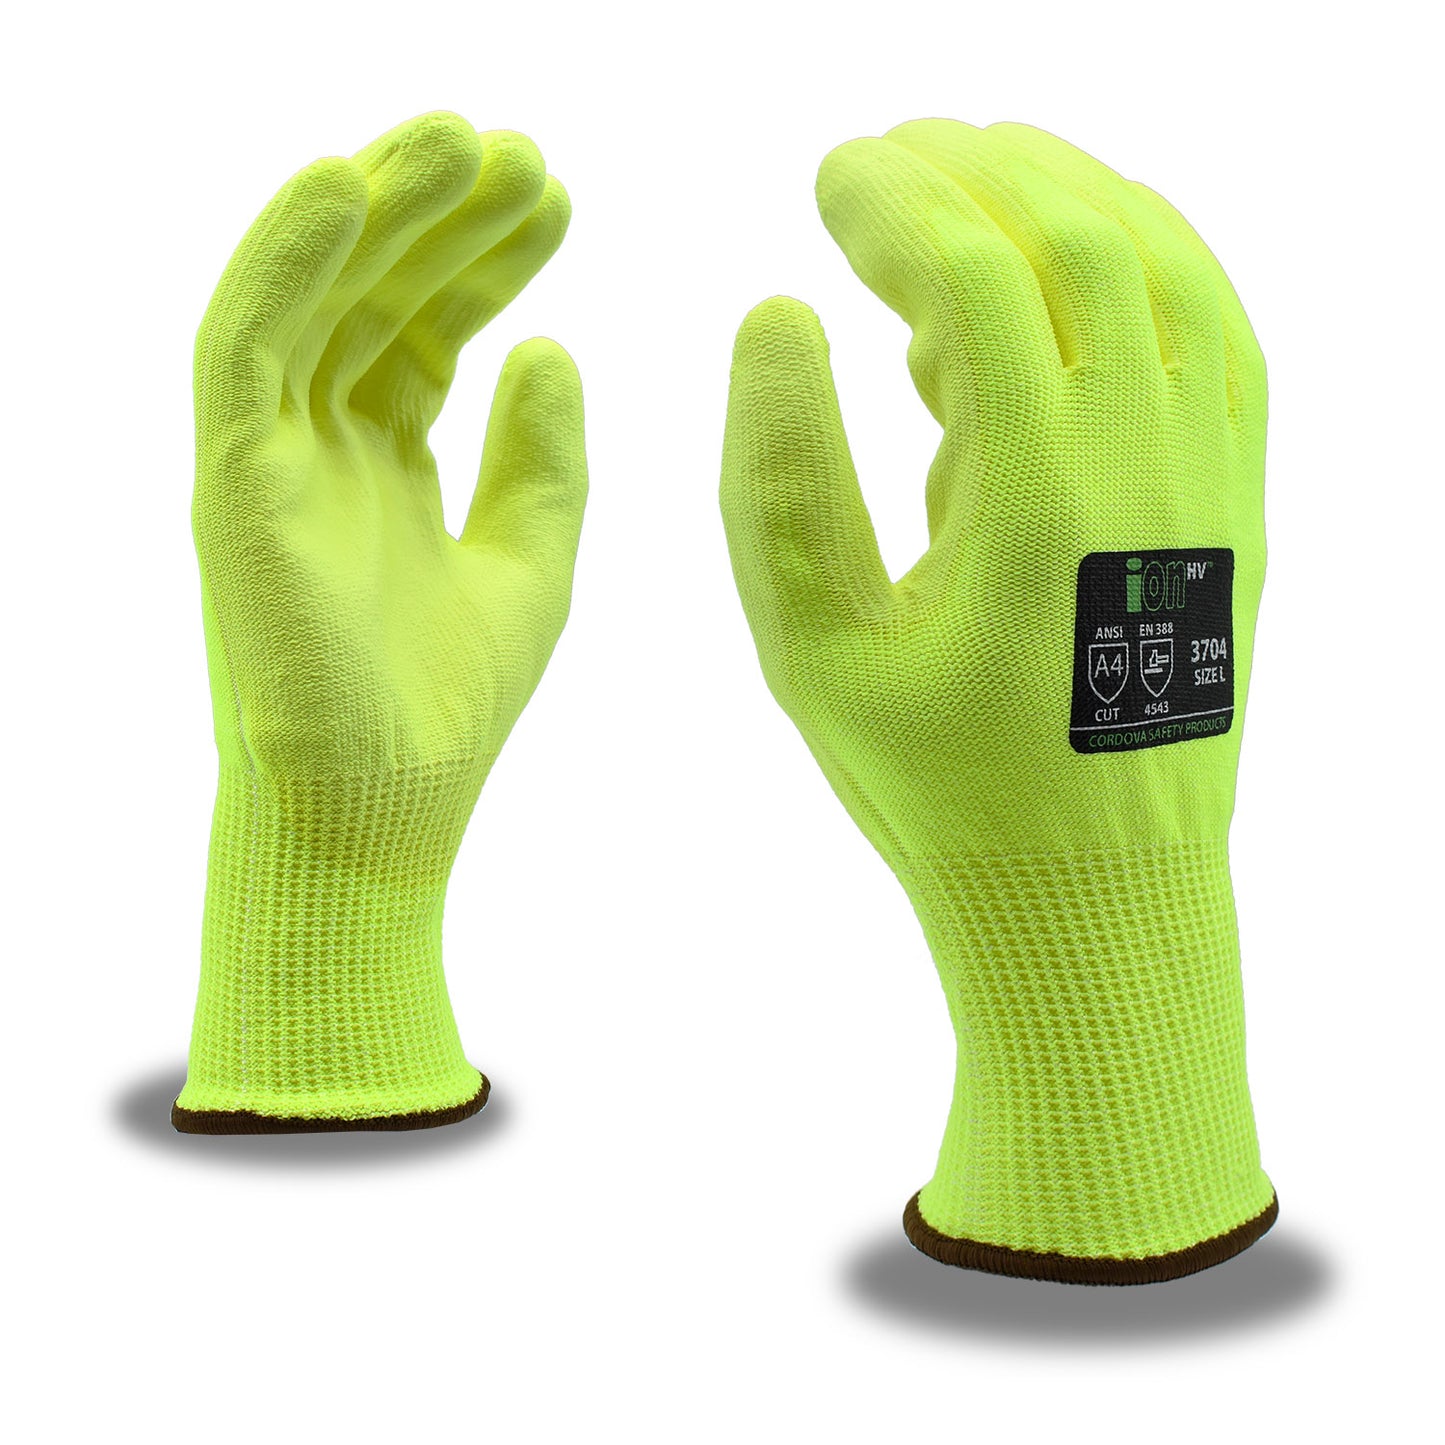 High-Visibility Cut-Resistant Gloves, ANSI Cut Level A4